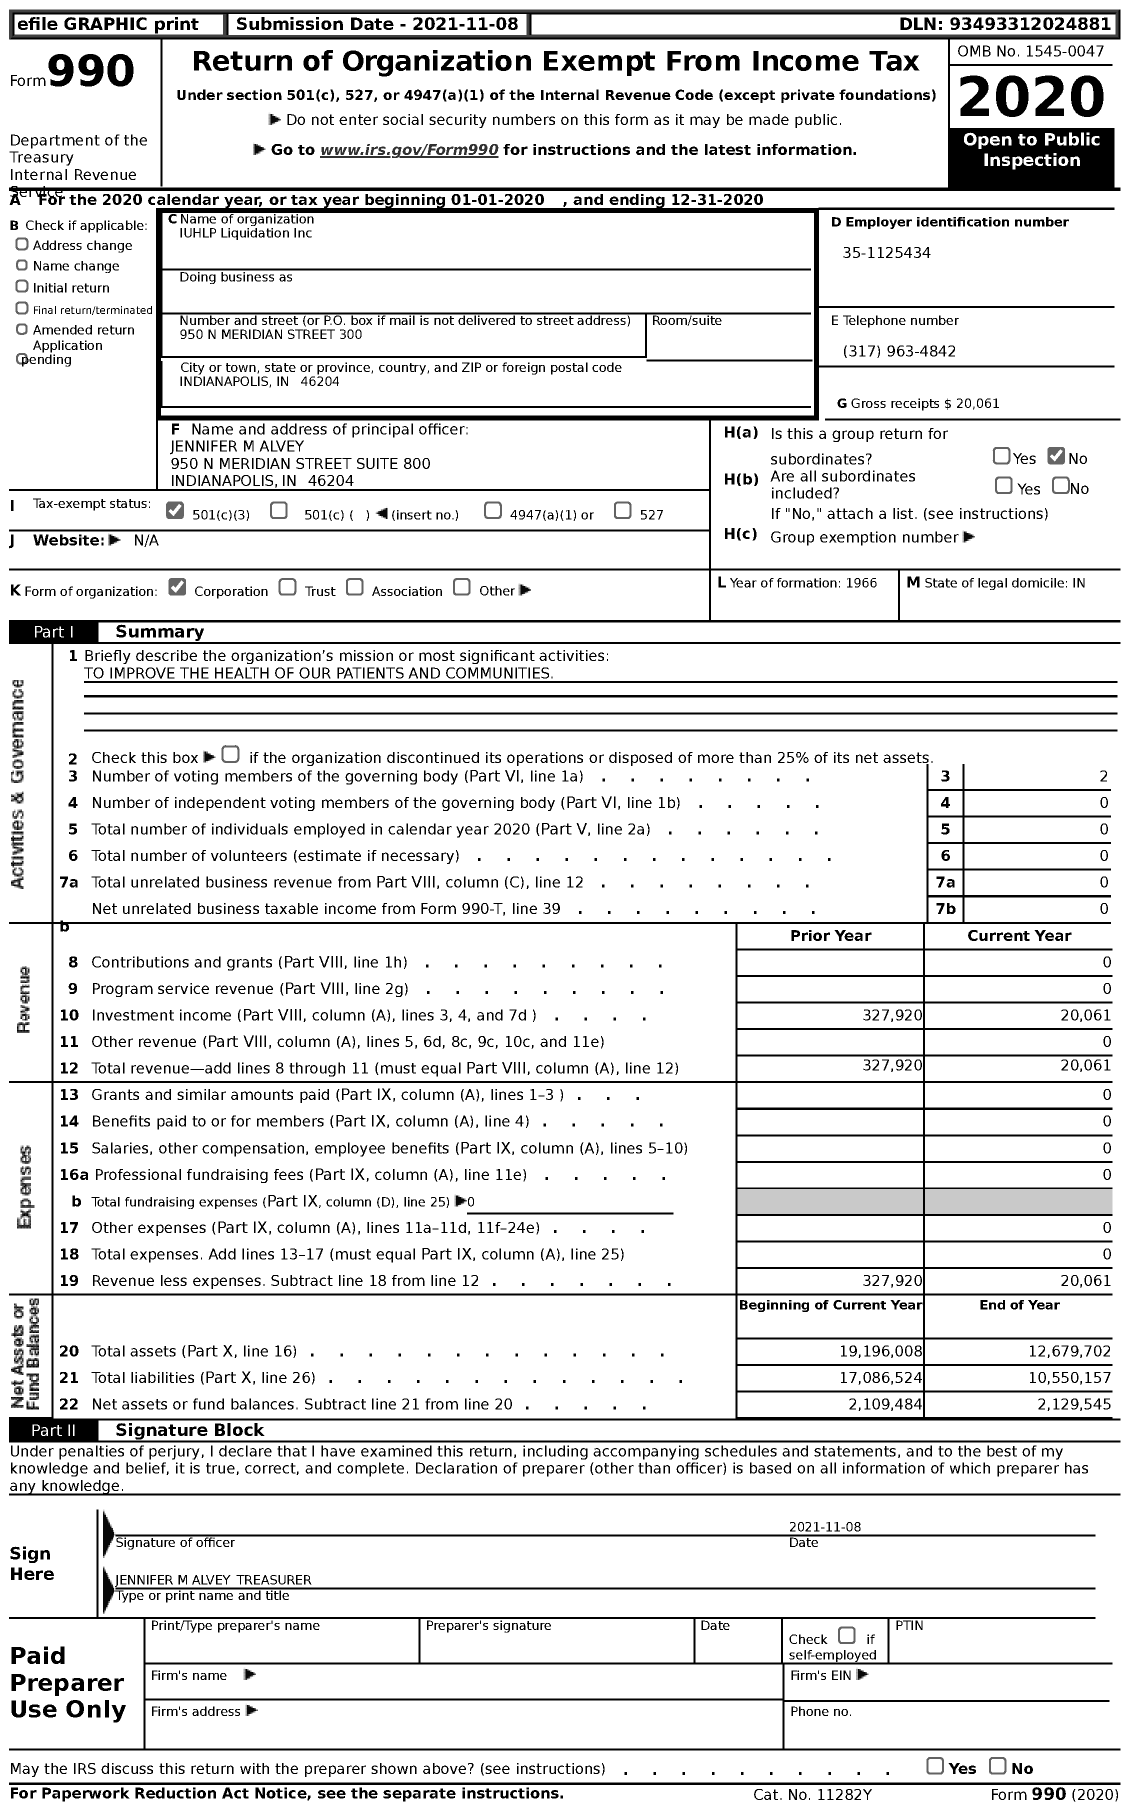 Image of first page of 2020 Form 990 for IUHLP Liquidation